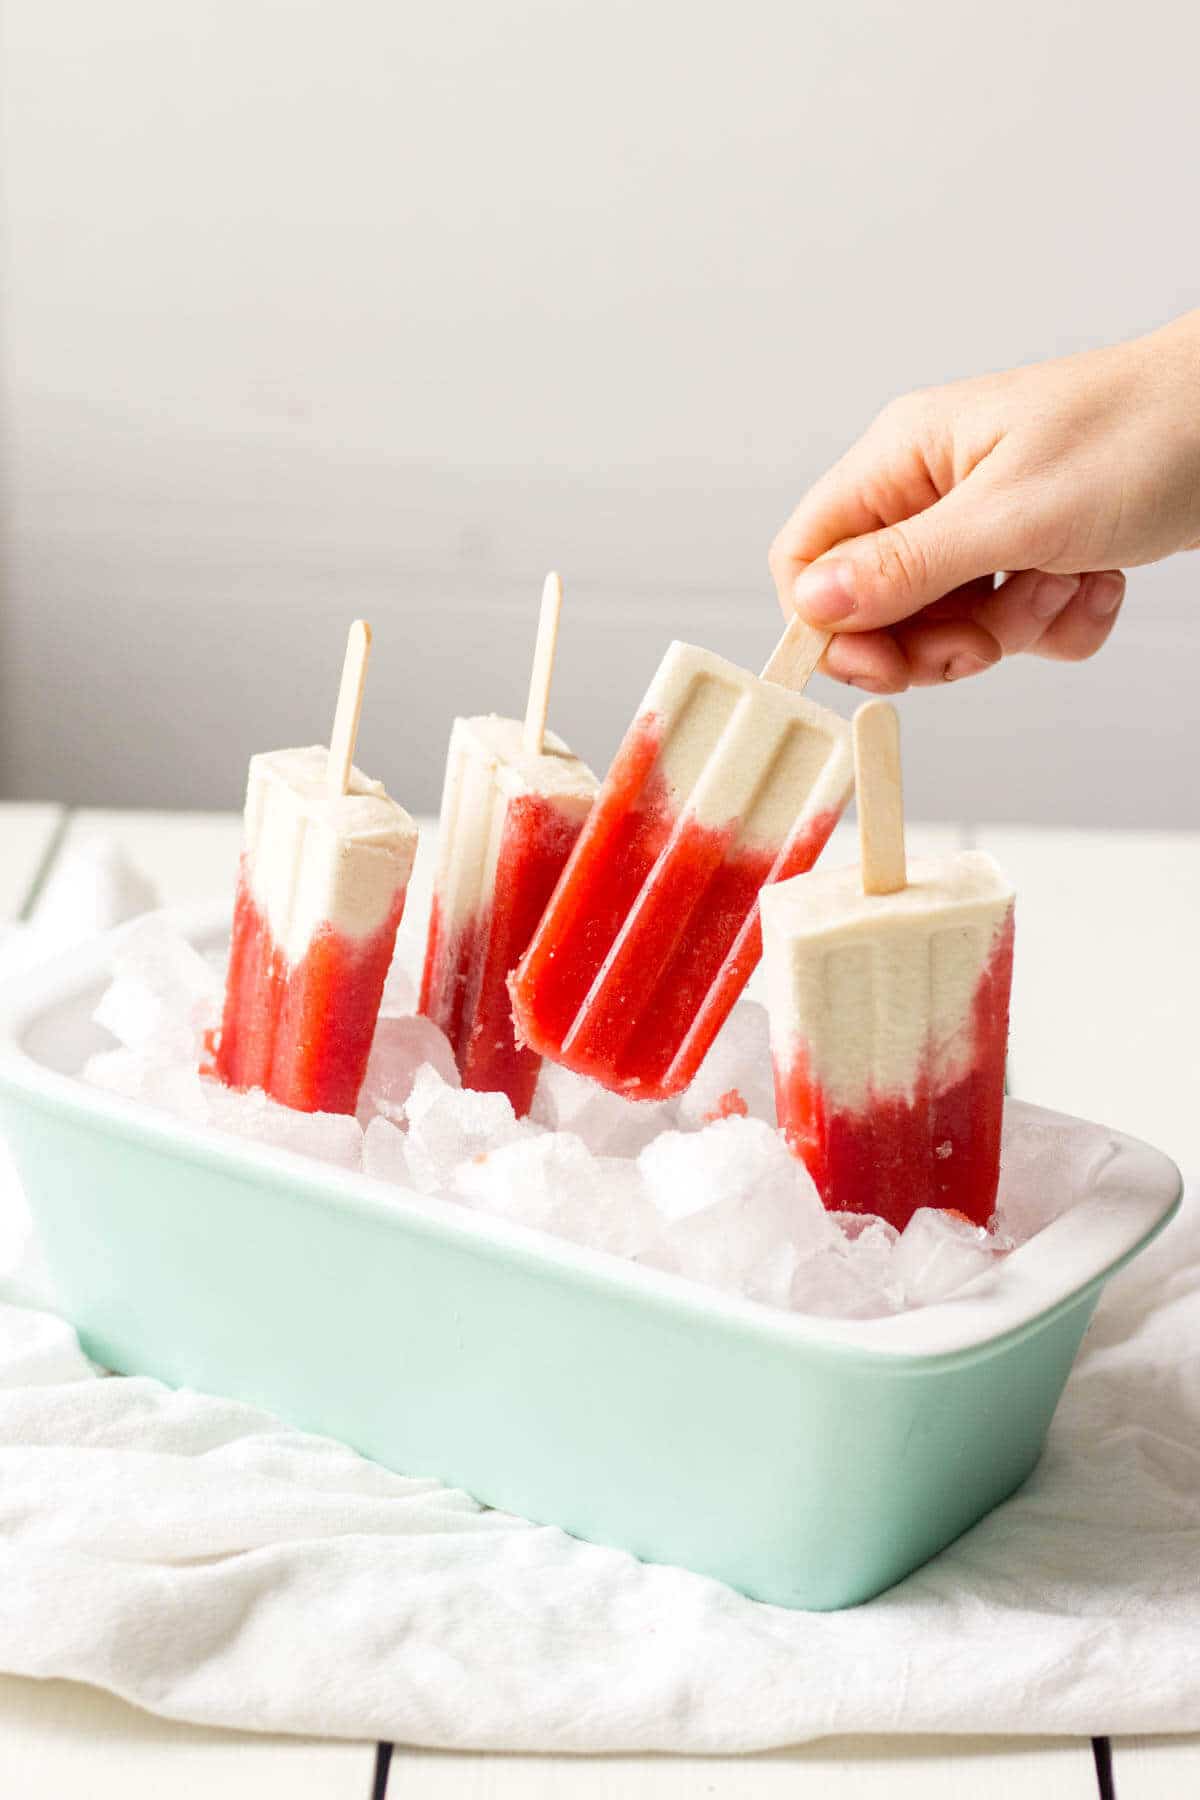 These paleo, gluten free and vegan popsicles are an easy summer/spring recipe to brighten up our day. The creamy layer is made with raw cashews and coconut milk and the strawberry layer is made with fresh strawberries and lemon. Both layers are sweetened slightly with pure maple syrup for a cool and sweet snack or dessert.